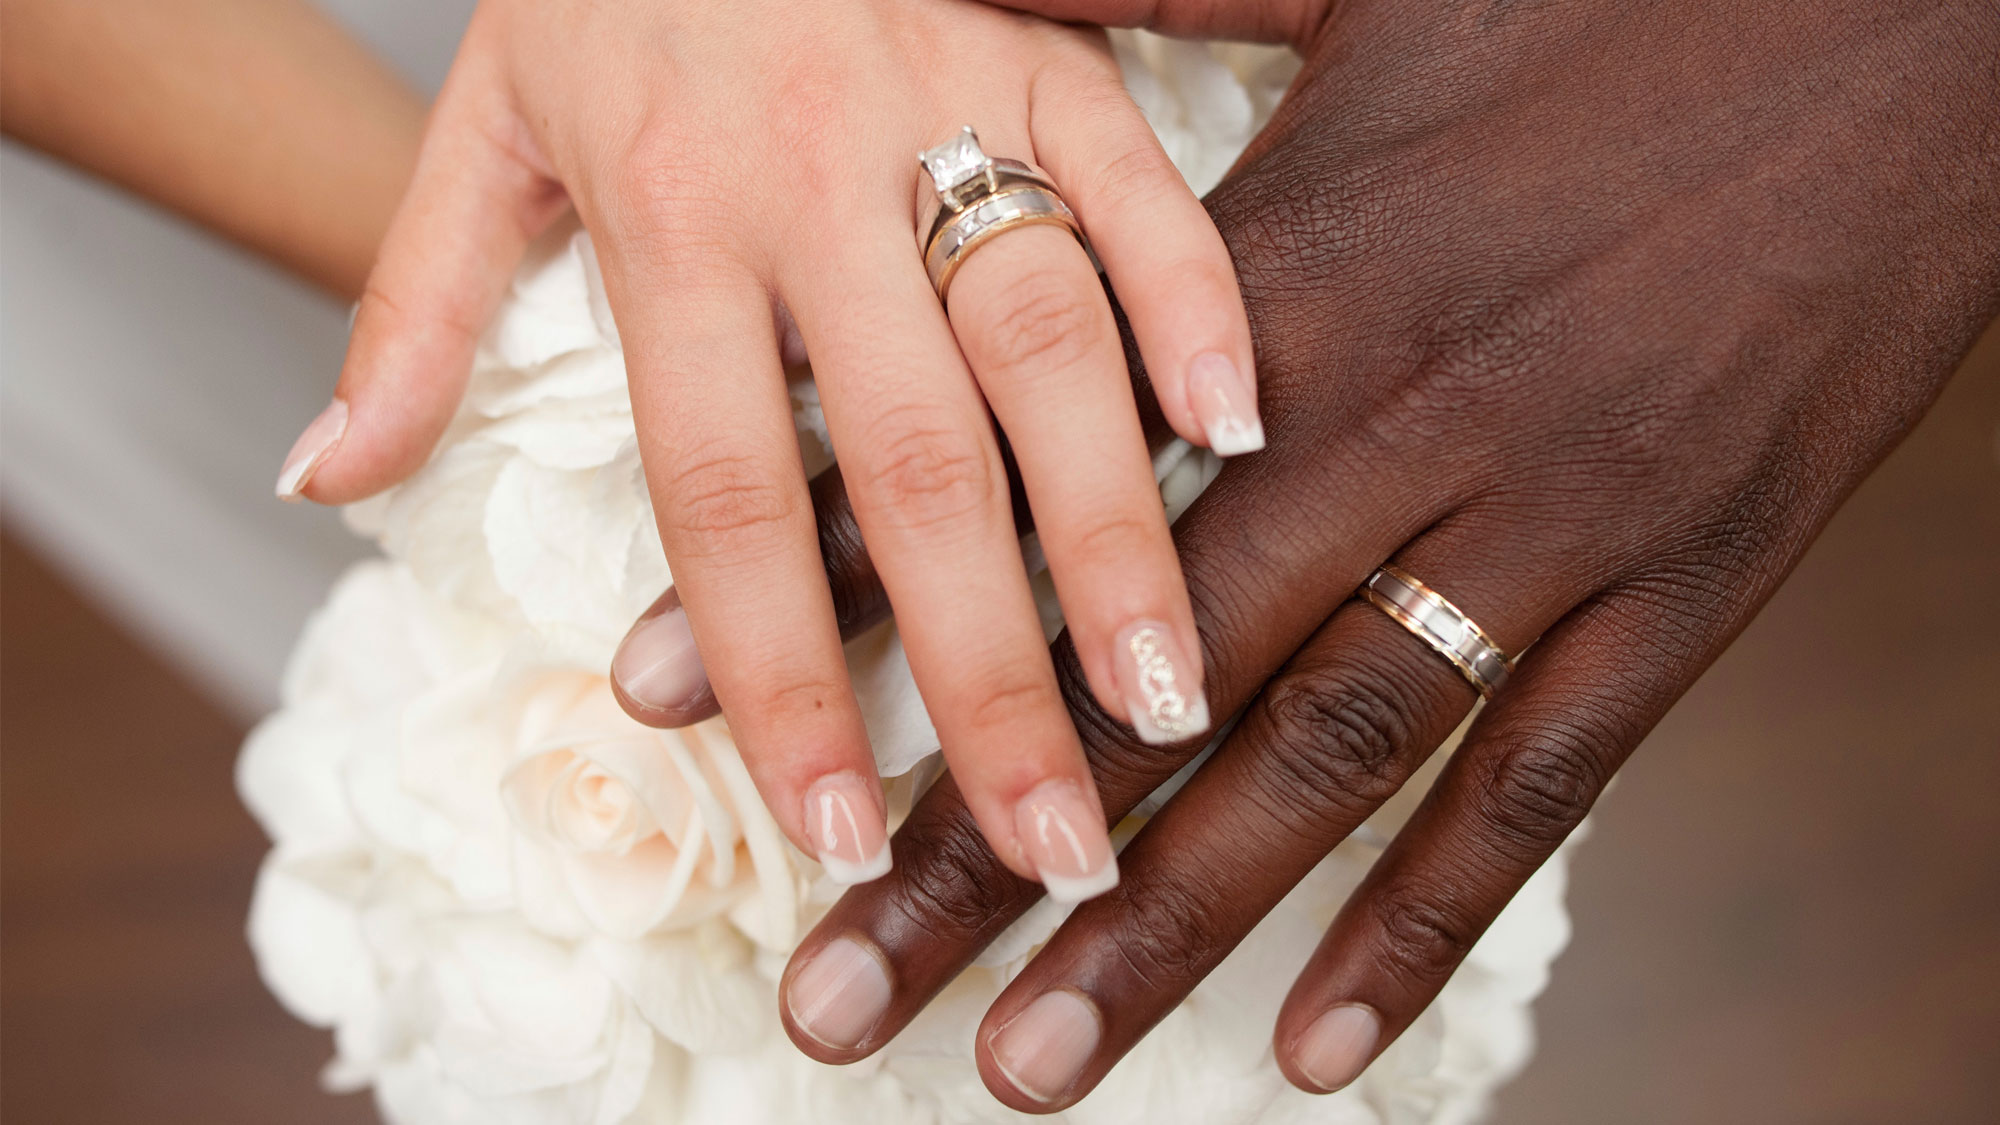 The Stats on Interracial Marriage